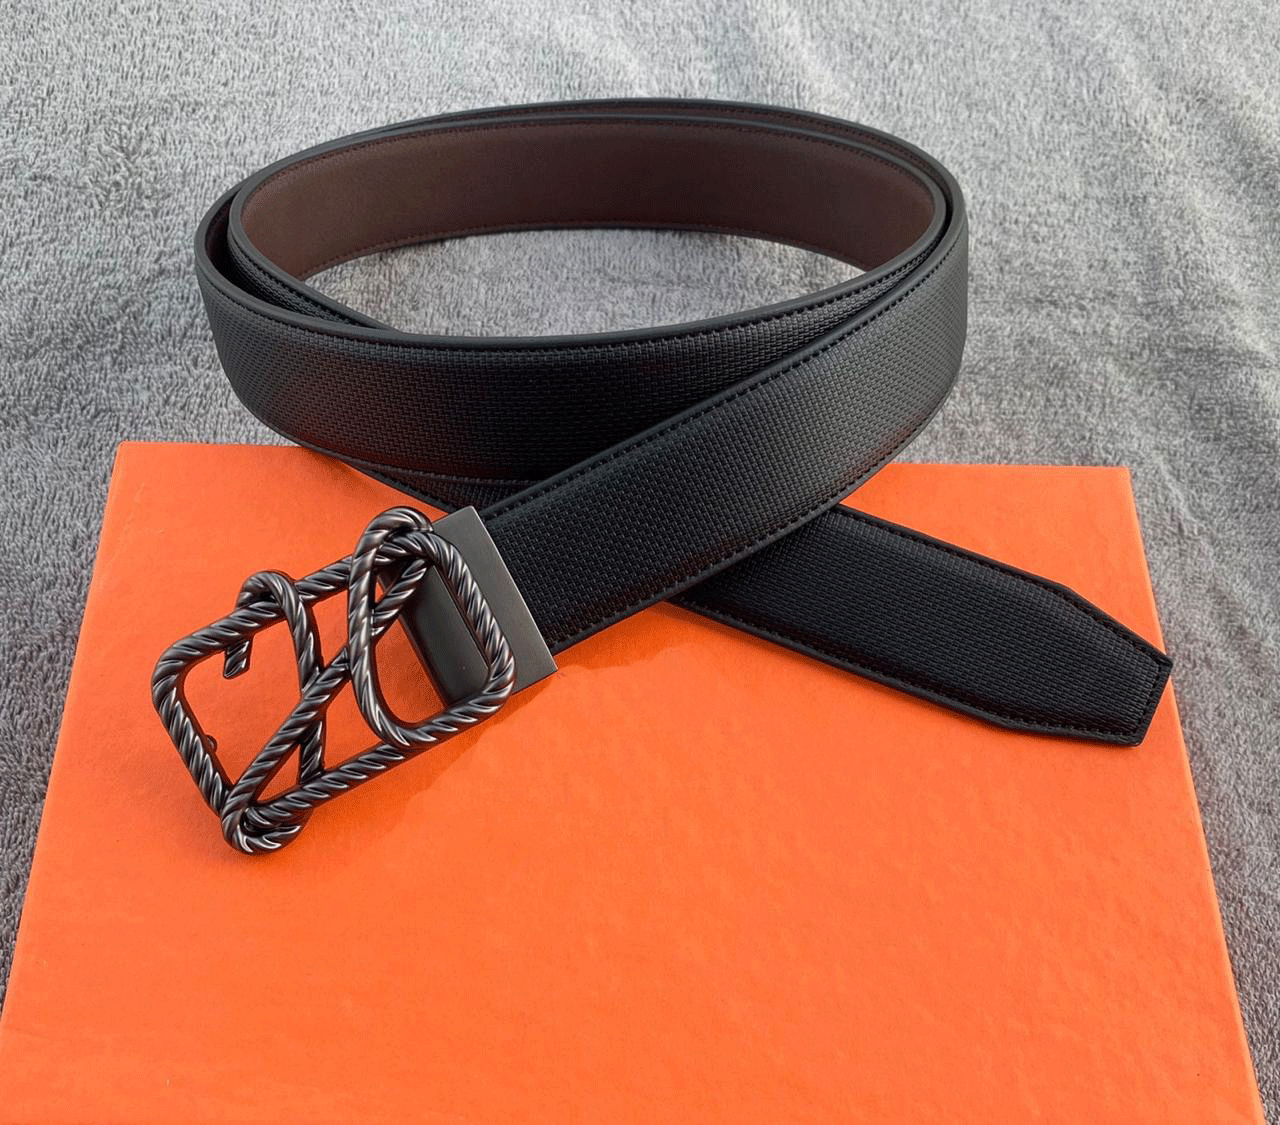 Trendy H Letter Pressing Buckle With Leather Strap -Unique and Classy